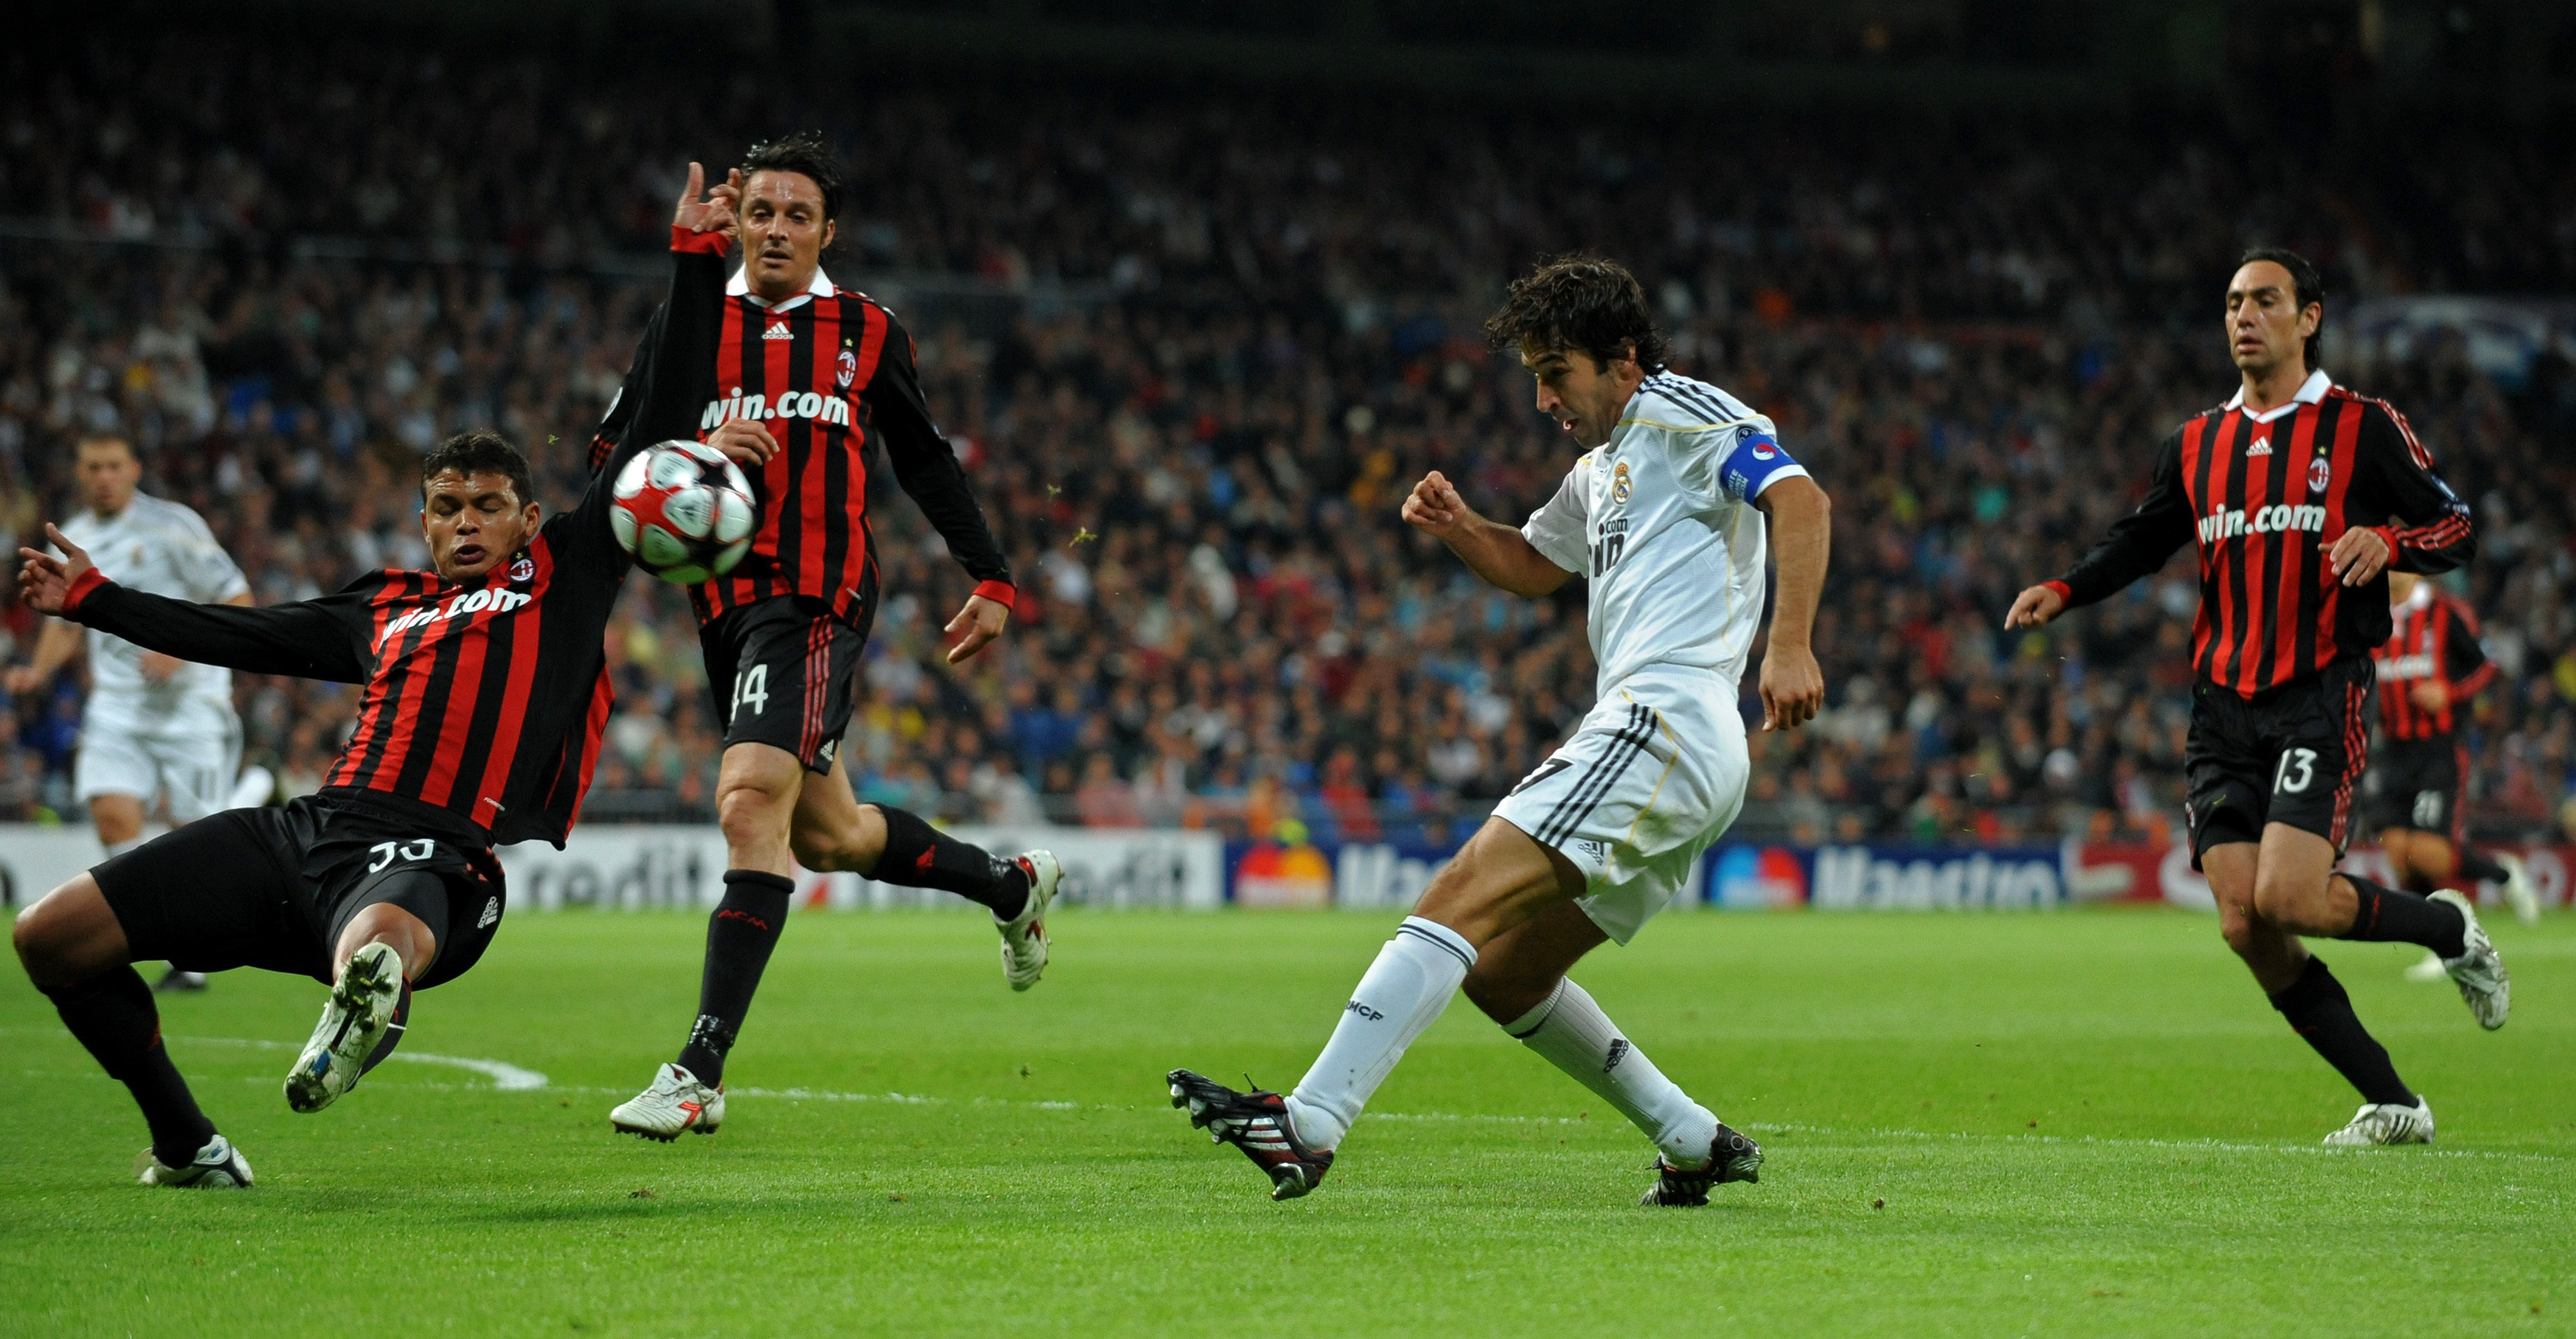 MADRID, SPAIN - OCTOBER 21:  Raul Gonzalez (2nd R) of Real Madrid shoots on goal in between AC Milan players Alessandro Nesta (R), Thiago Silva (L) and Massimo Oddo during the Champions League group C match between Real Madrid and AC Milan at the Estadio